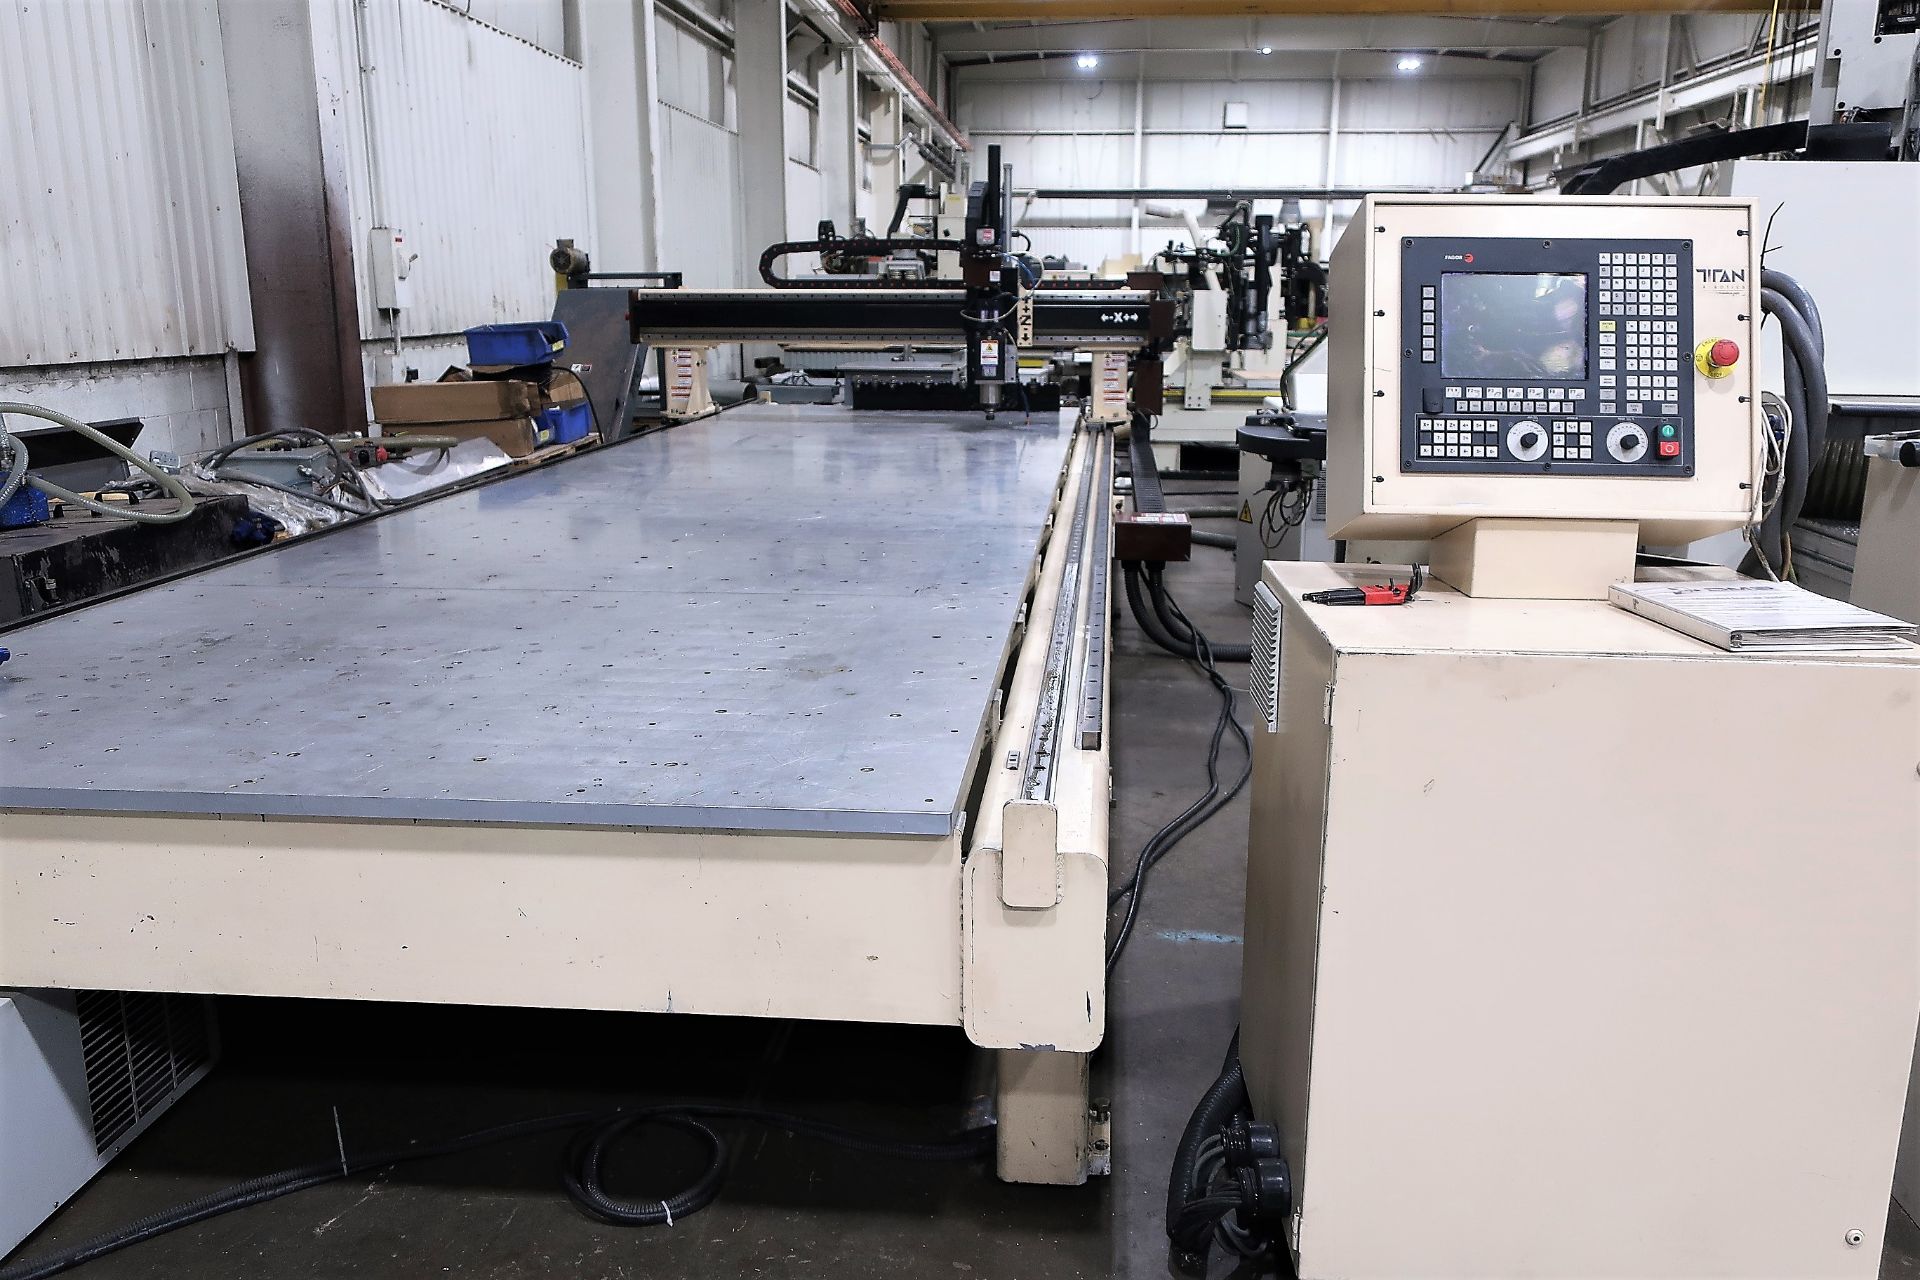 7'x25' MOTION MASTER MB-725C HEAVY DUTY 3-AXIS CNC ROUTER W/ 30 HP SPINDLE, NEW 2016